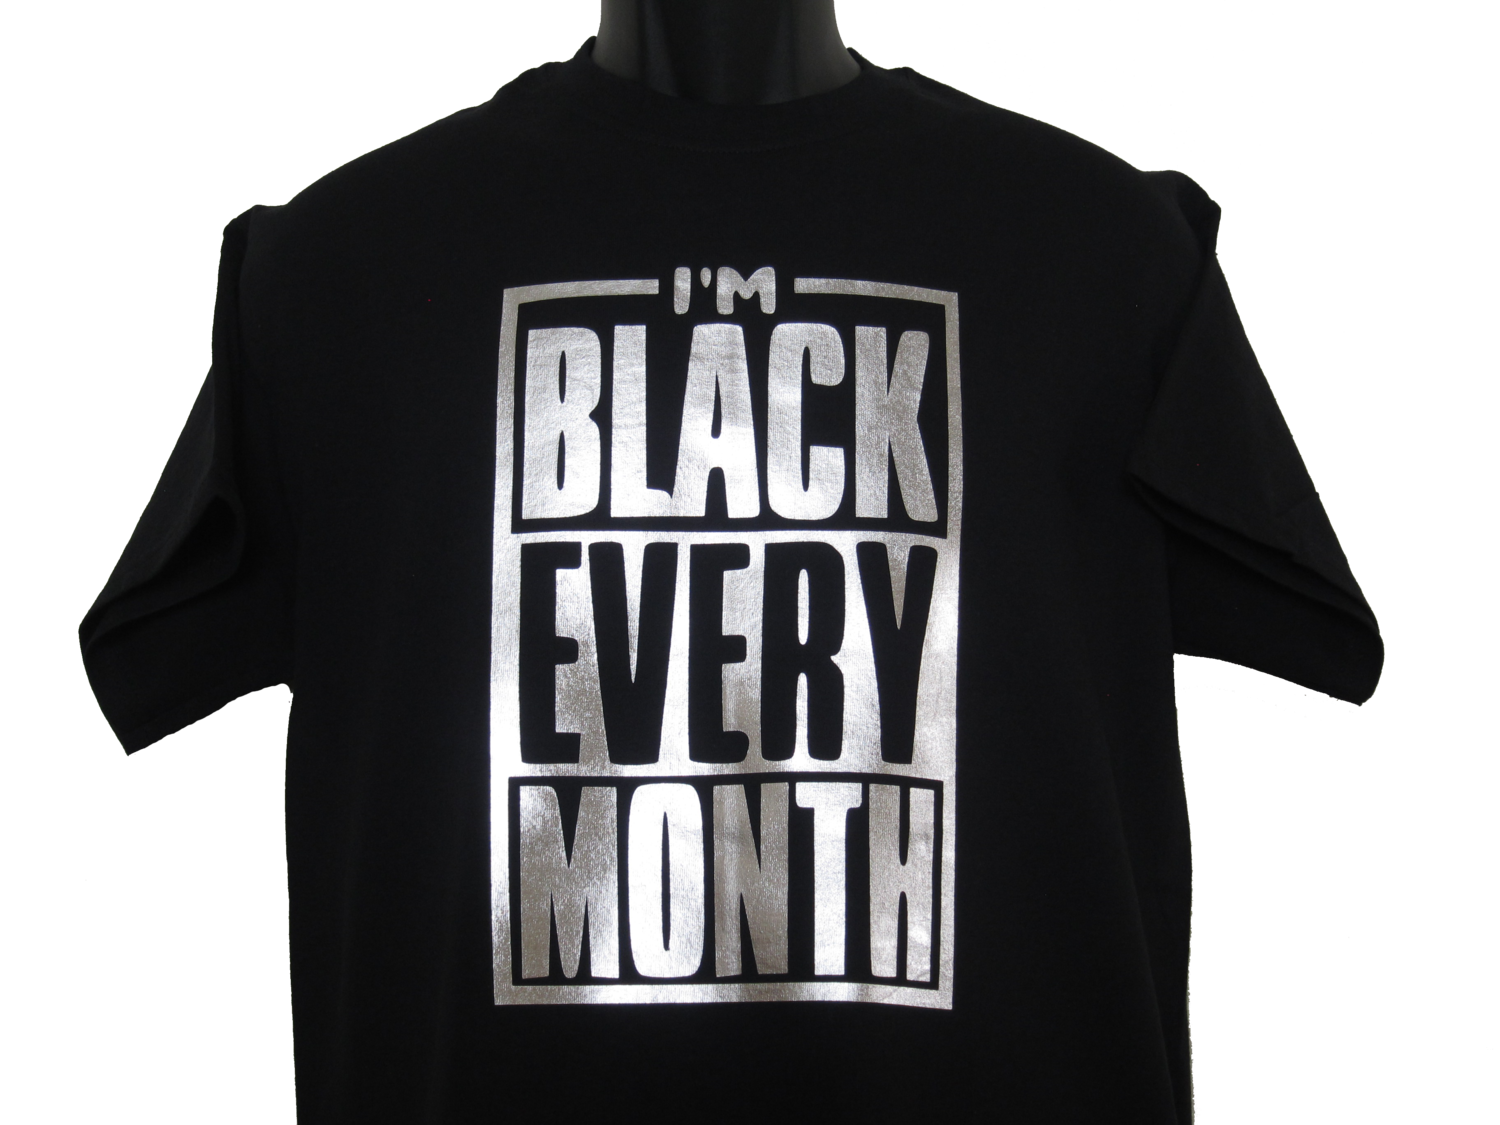 BLACK EVERY MONTH